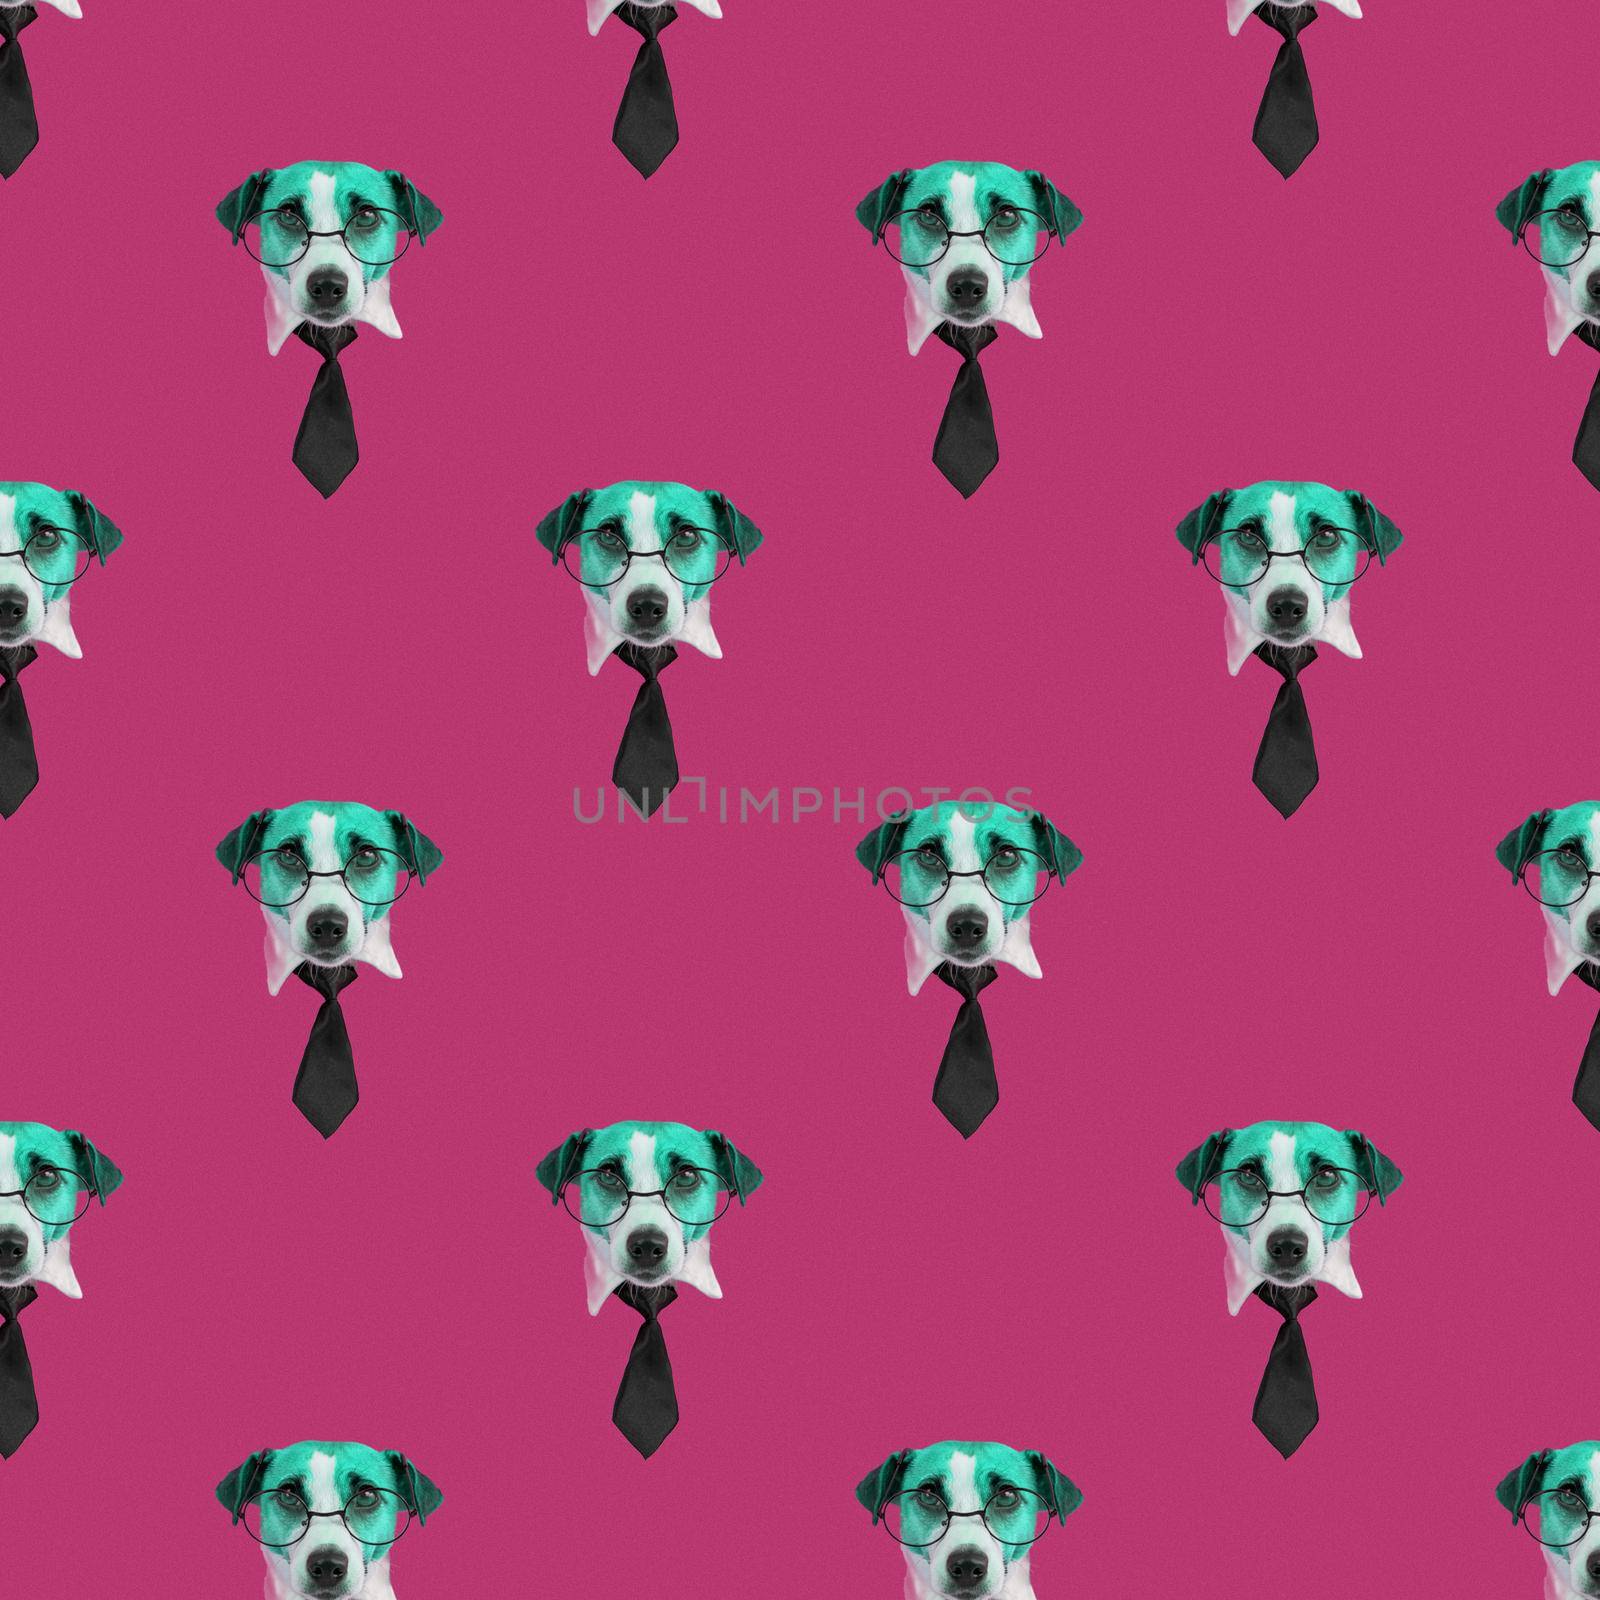 Muzzle of a Jack Russell Terrier dog with glasses and a tie on a pink background. Isolate. Seamless pattern. by mrwed54